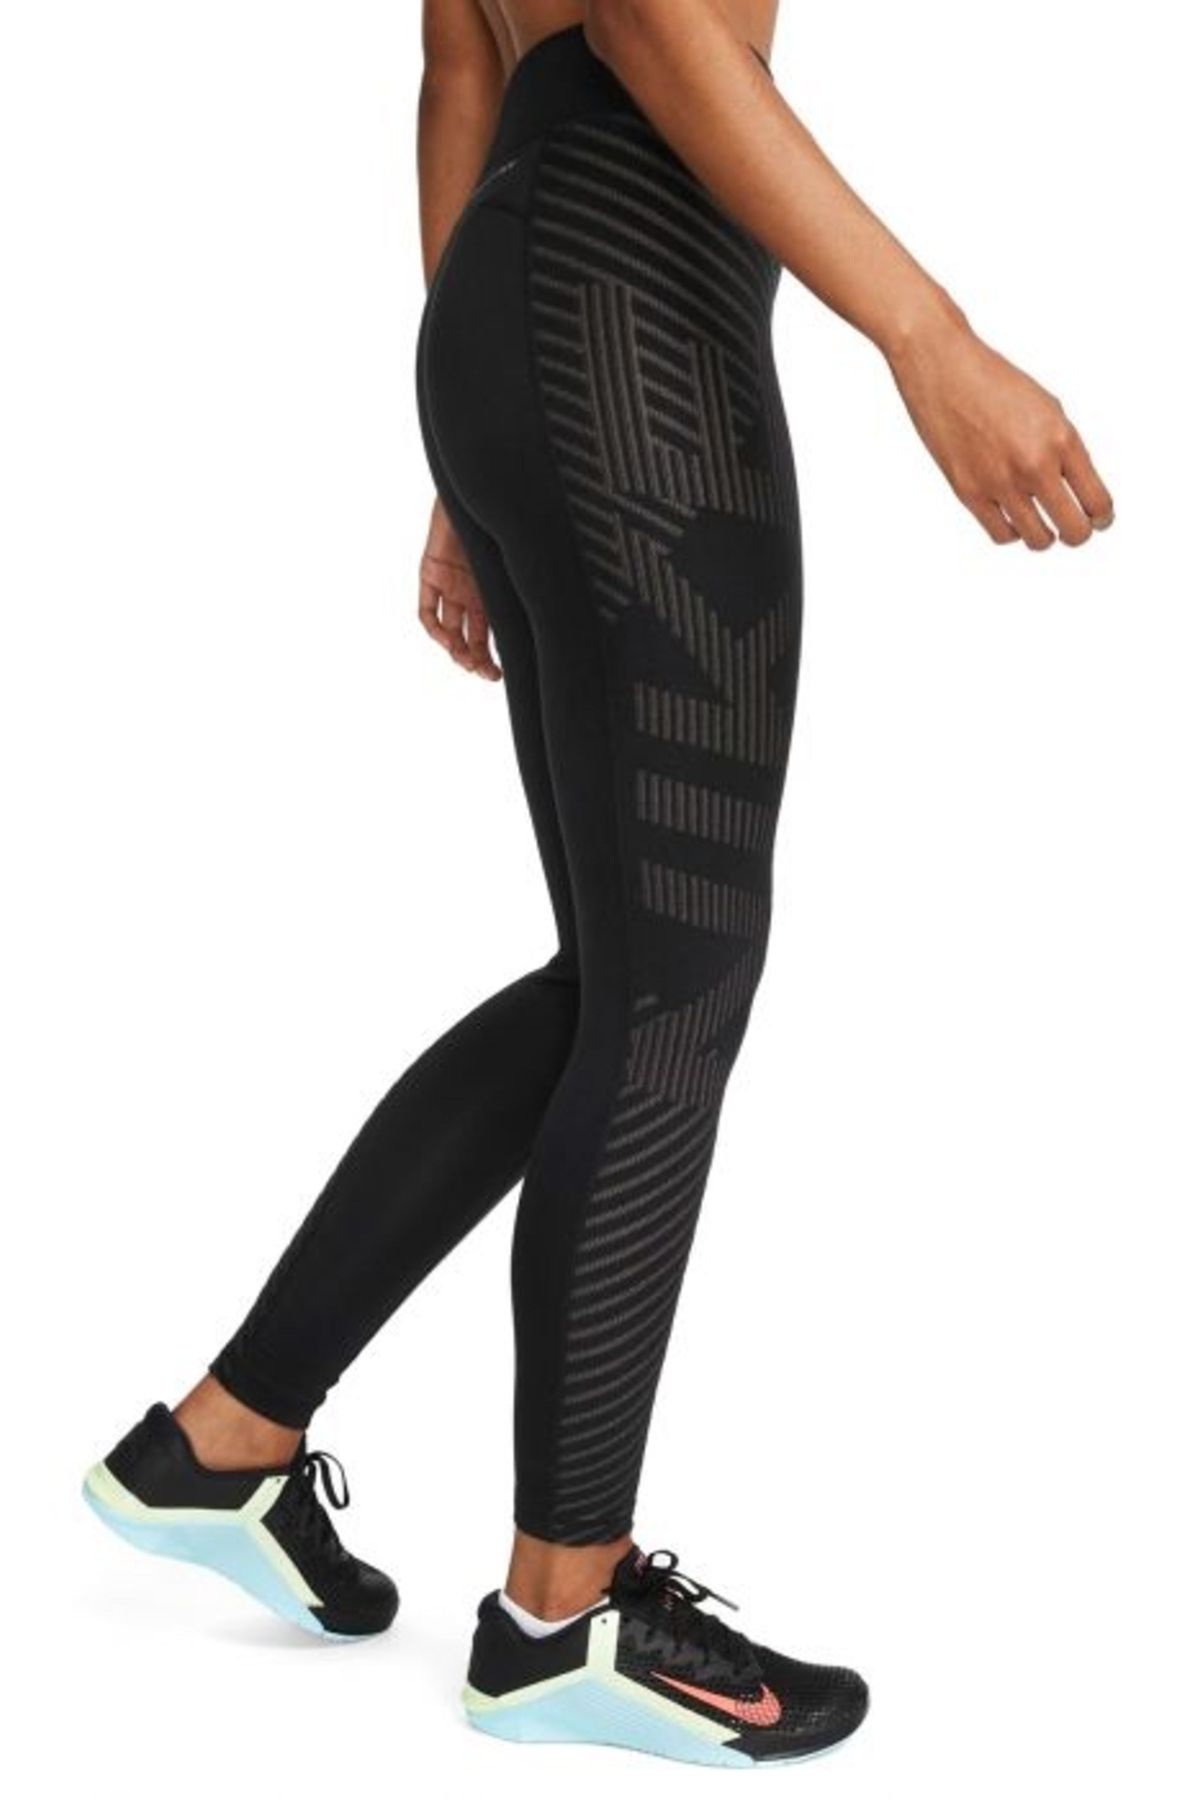 Womens Nike Pro Therma-fit ADV Training leggings size xs msrp 80.00